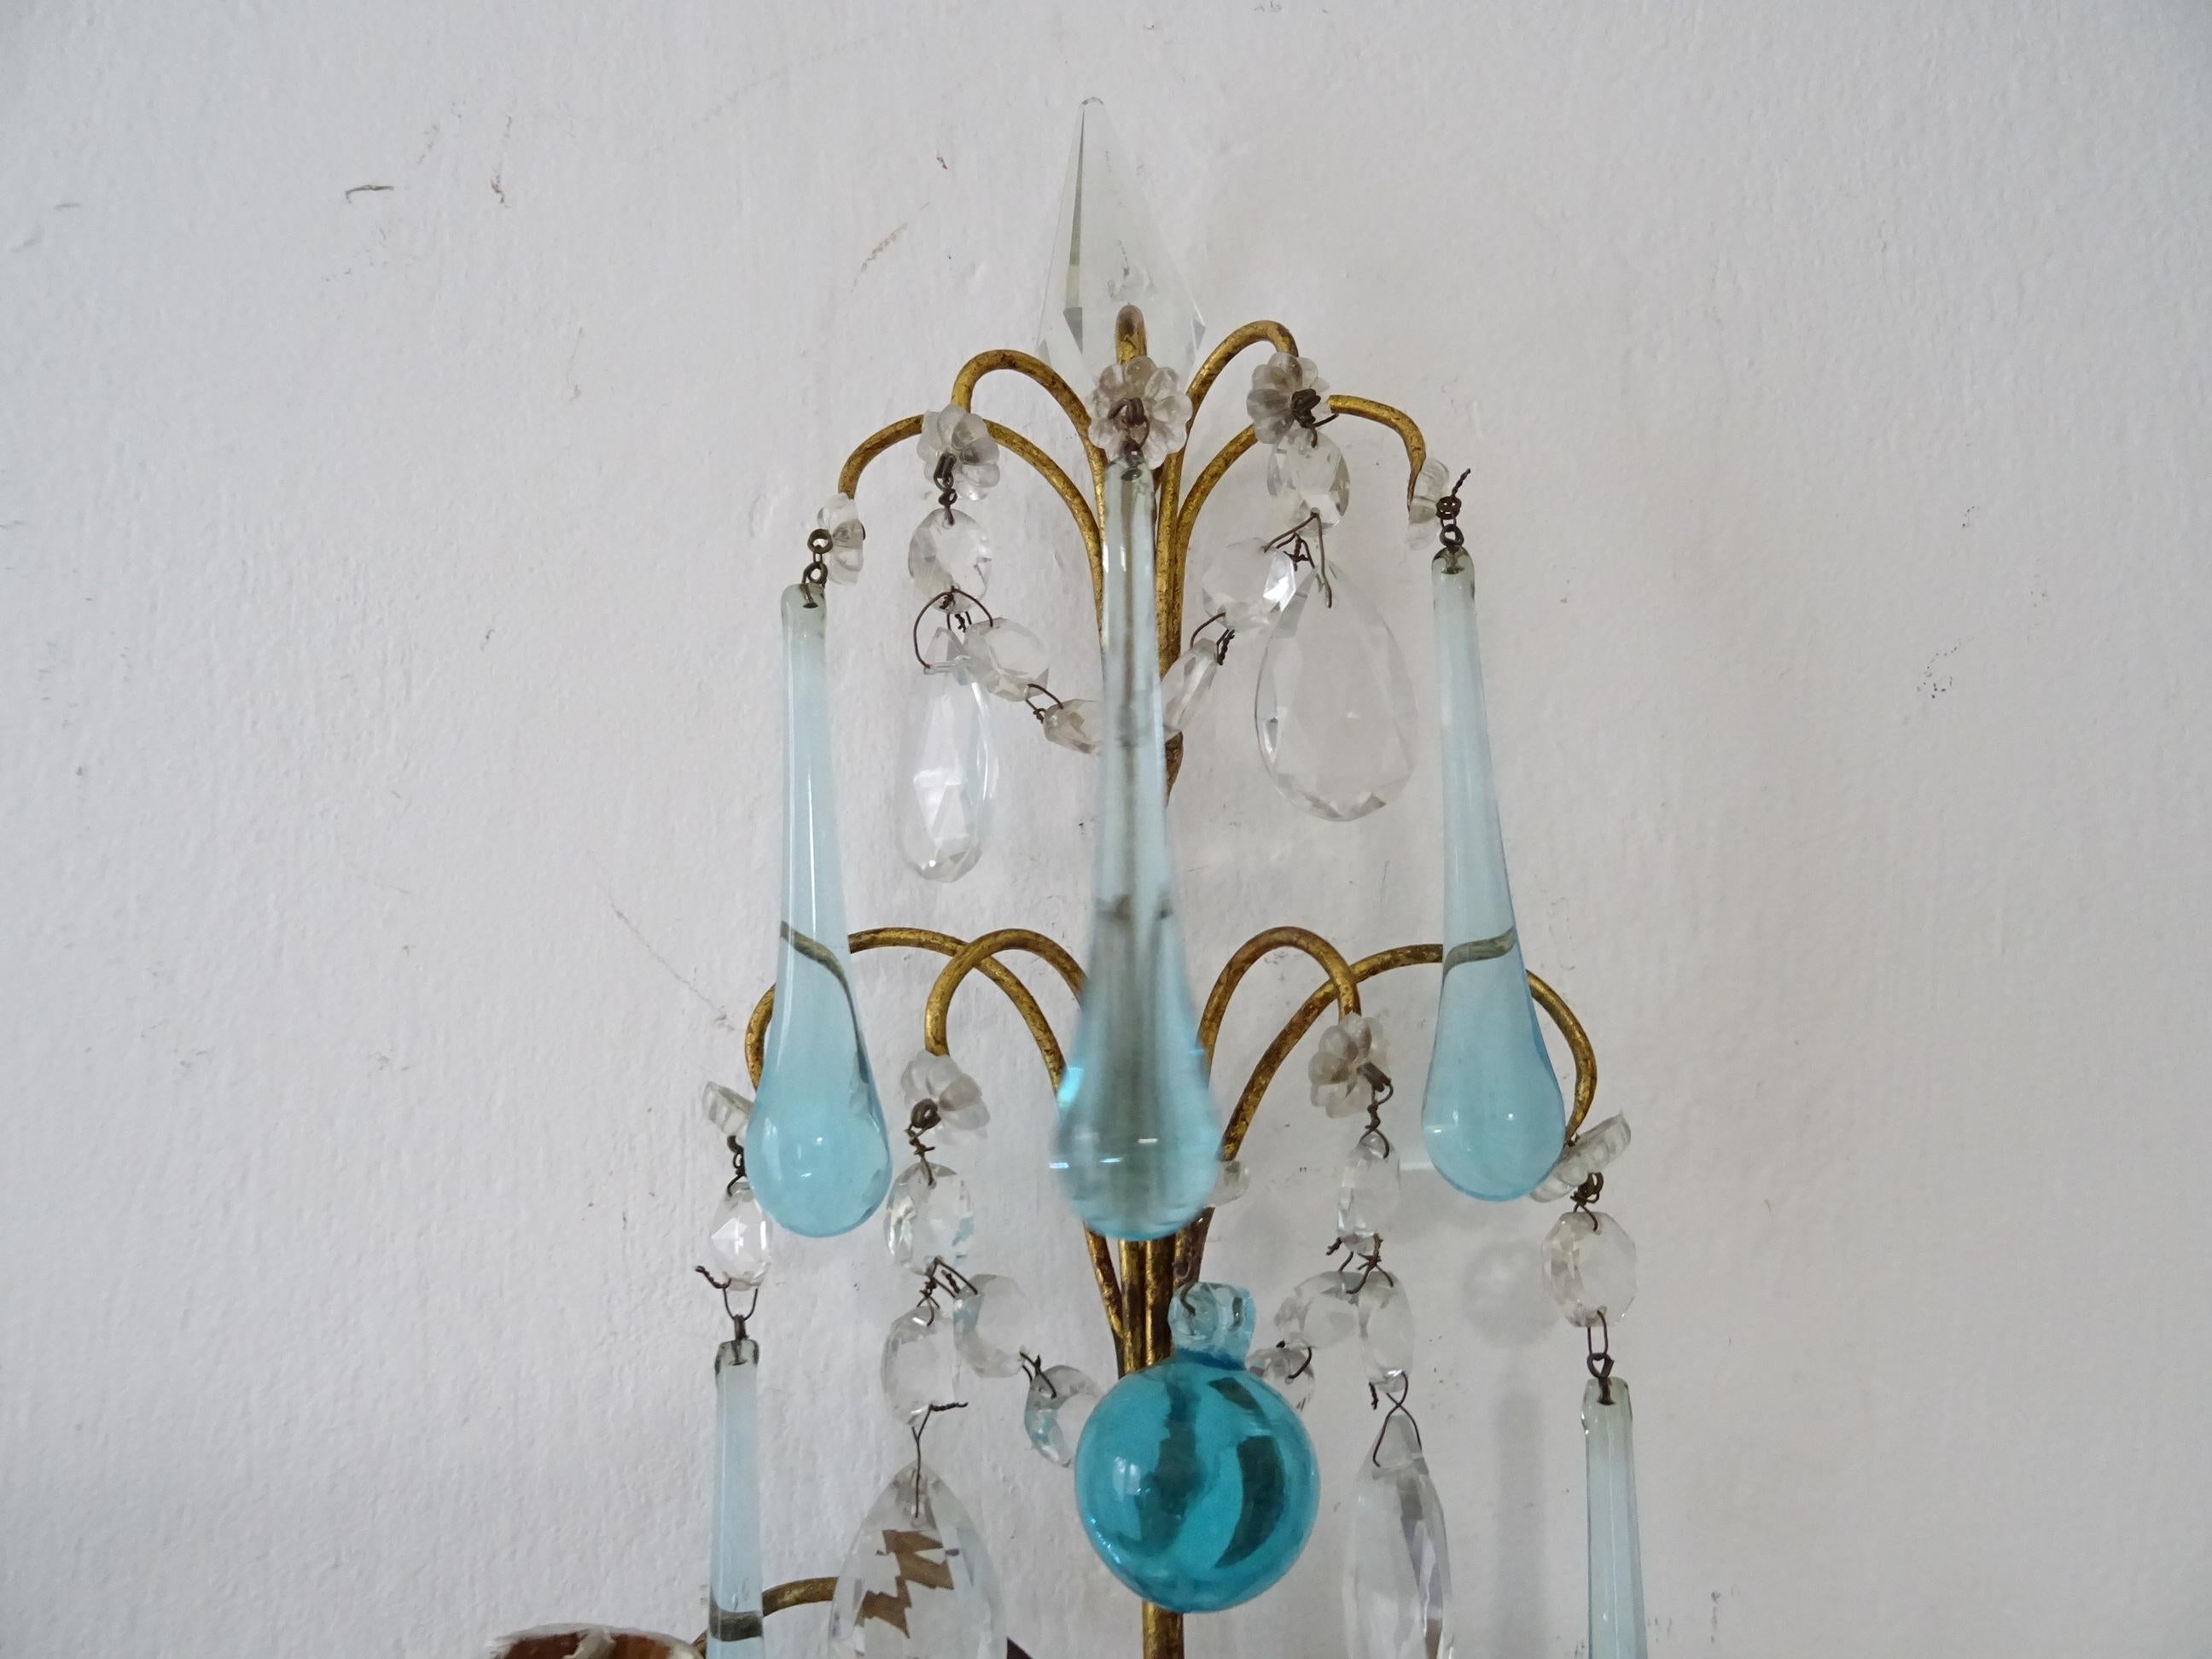 1920 French Aqua Blue Murano Flowers Drops and Crystal Prisms Spears Sconces Big 5